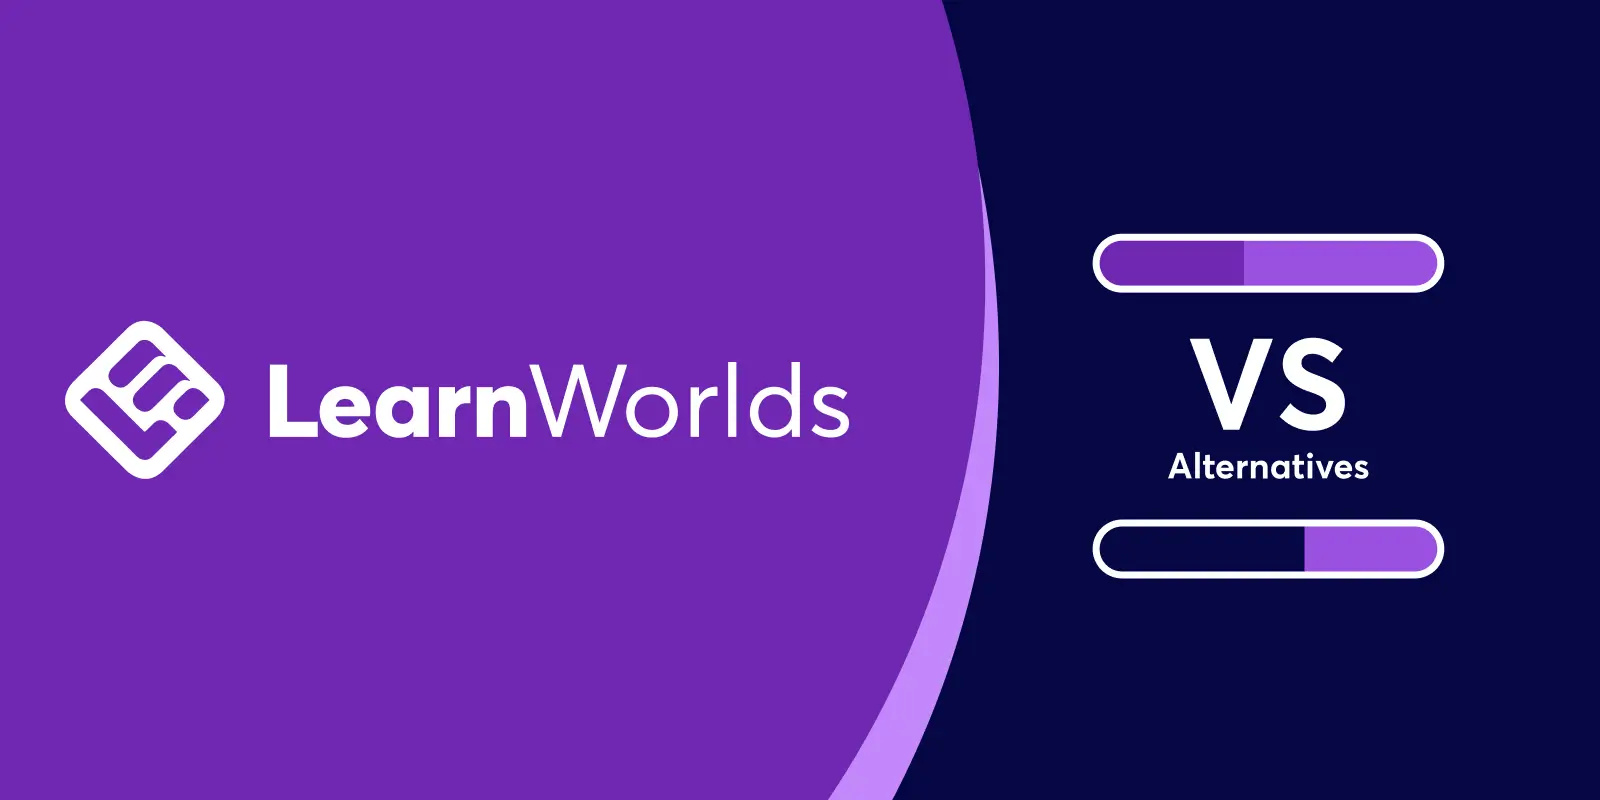 Find the best learnworlds alternatives and competitors. Compare which one works for you and why you should or should not choose LearnWorlds.